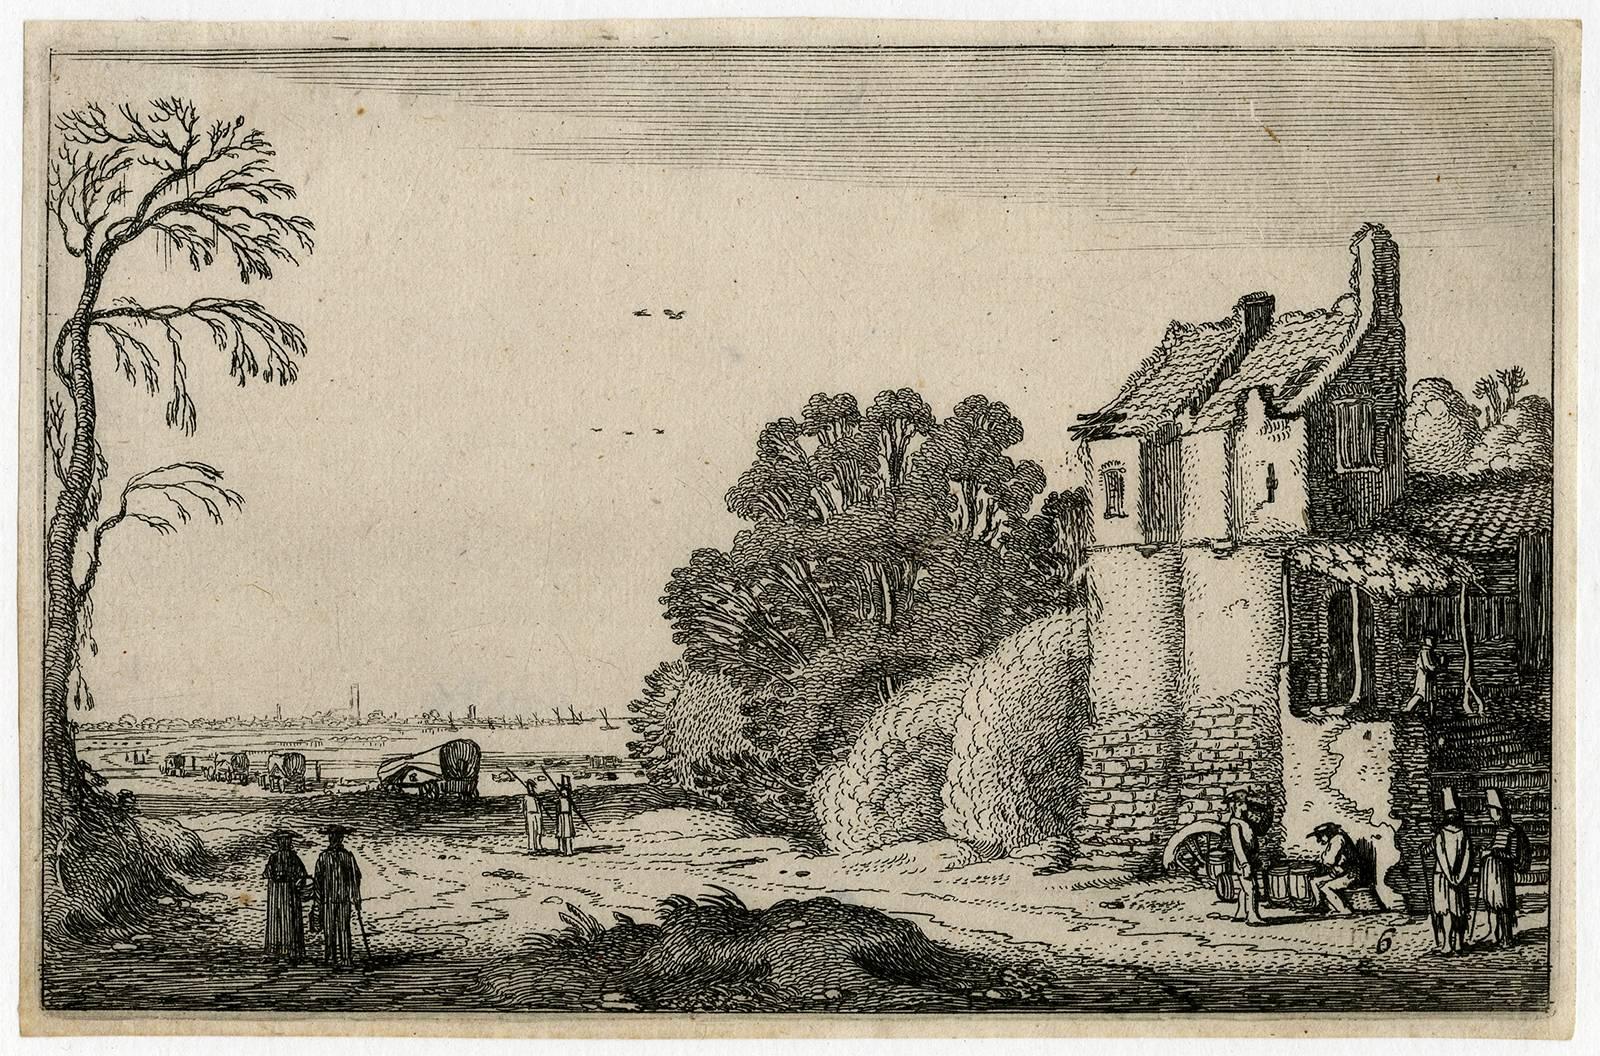 Jan Van de Velde Landscape Print - Untitled - Landscape with a road and lodge and carriages moving toward a city.